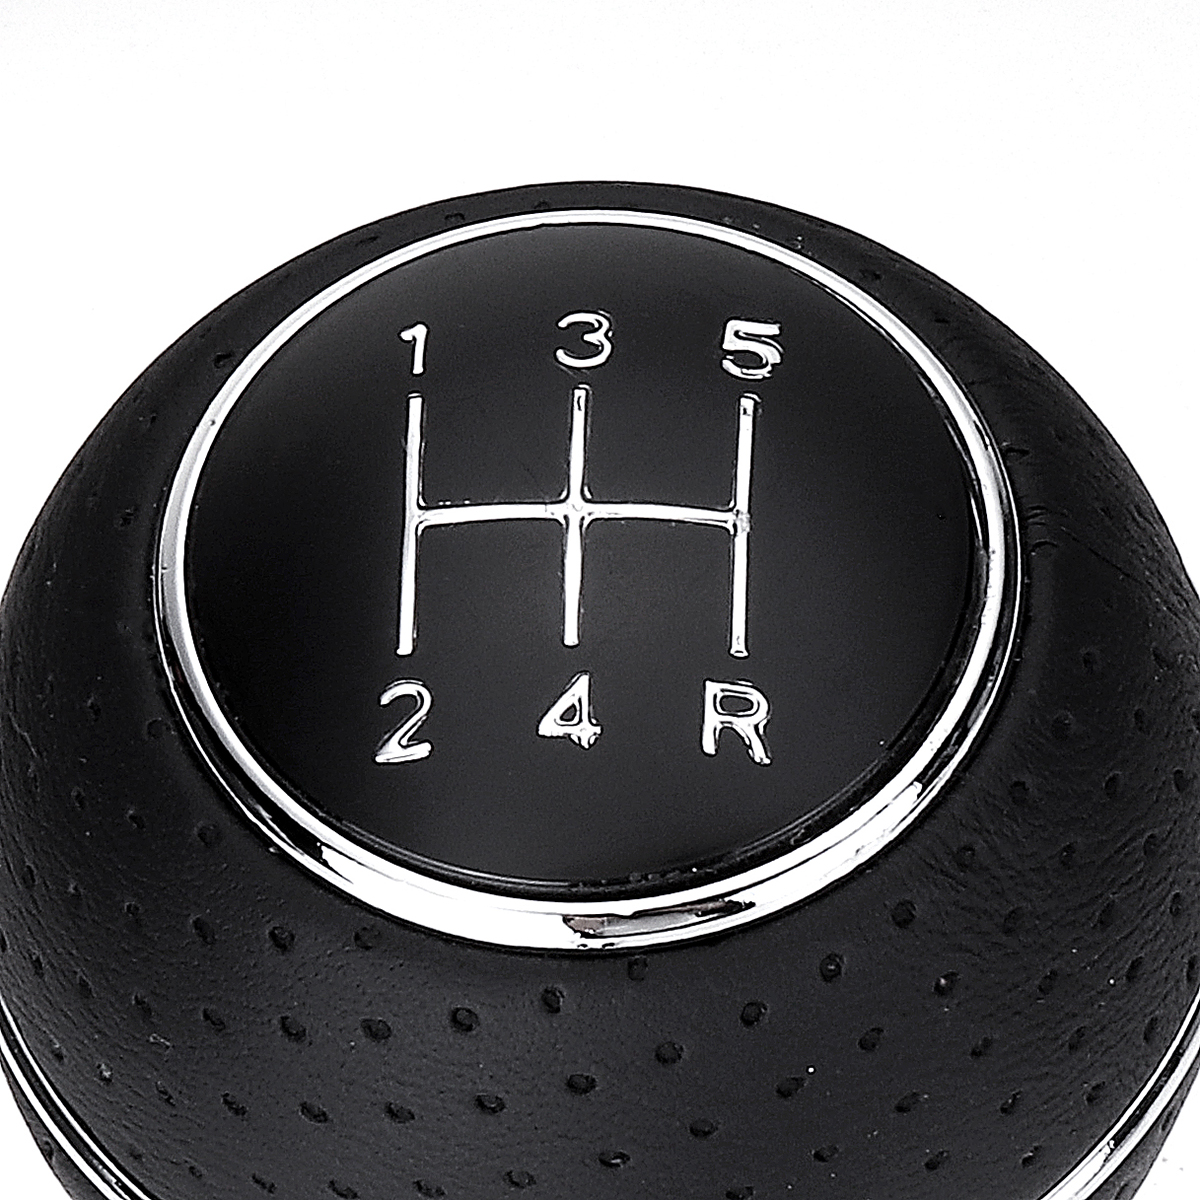 5 Speed Gear Shift Knob with Sleeve Adapter Lever Black for Ford Focus Mondeo Fiesta